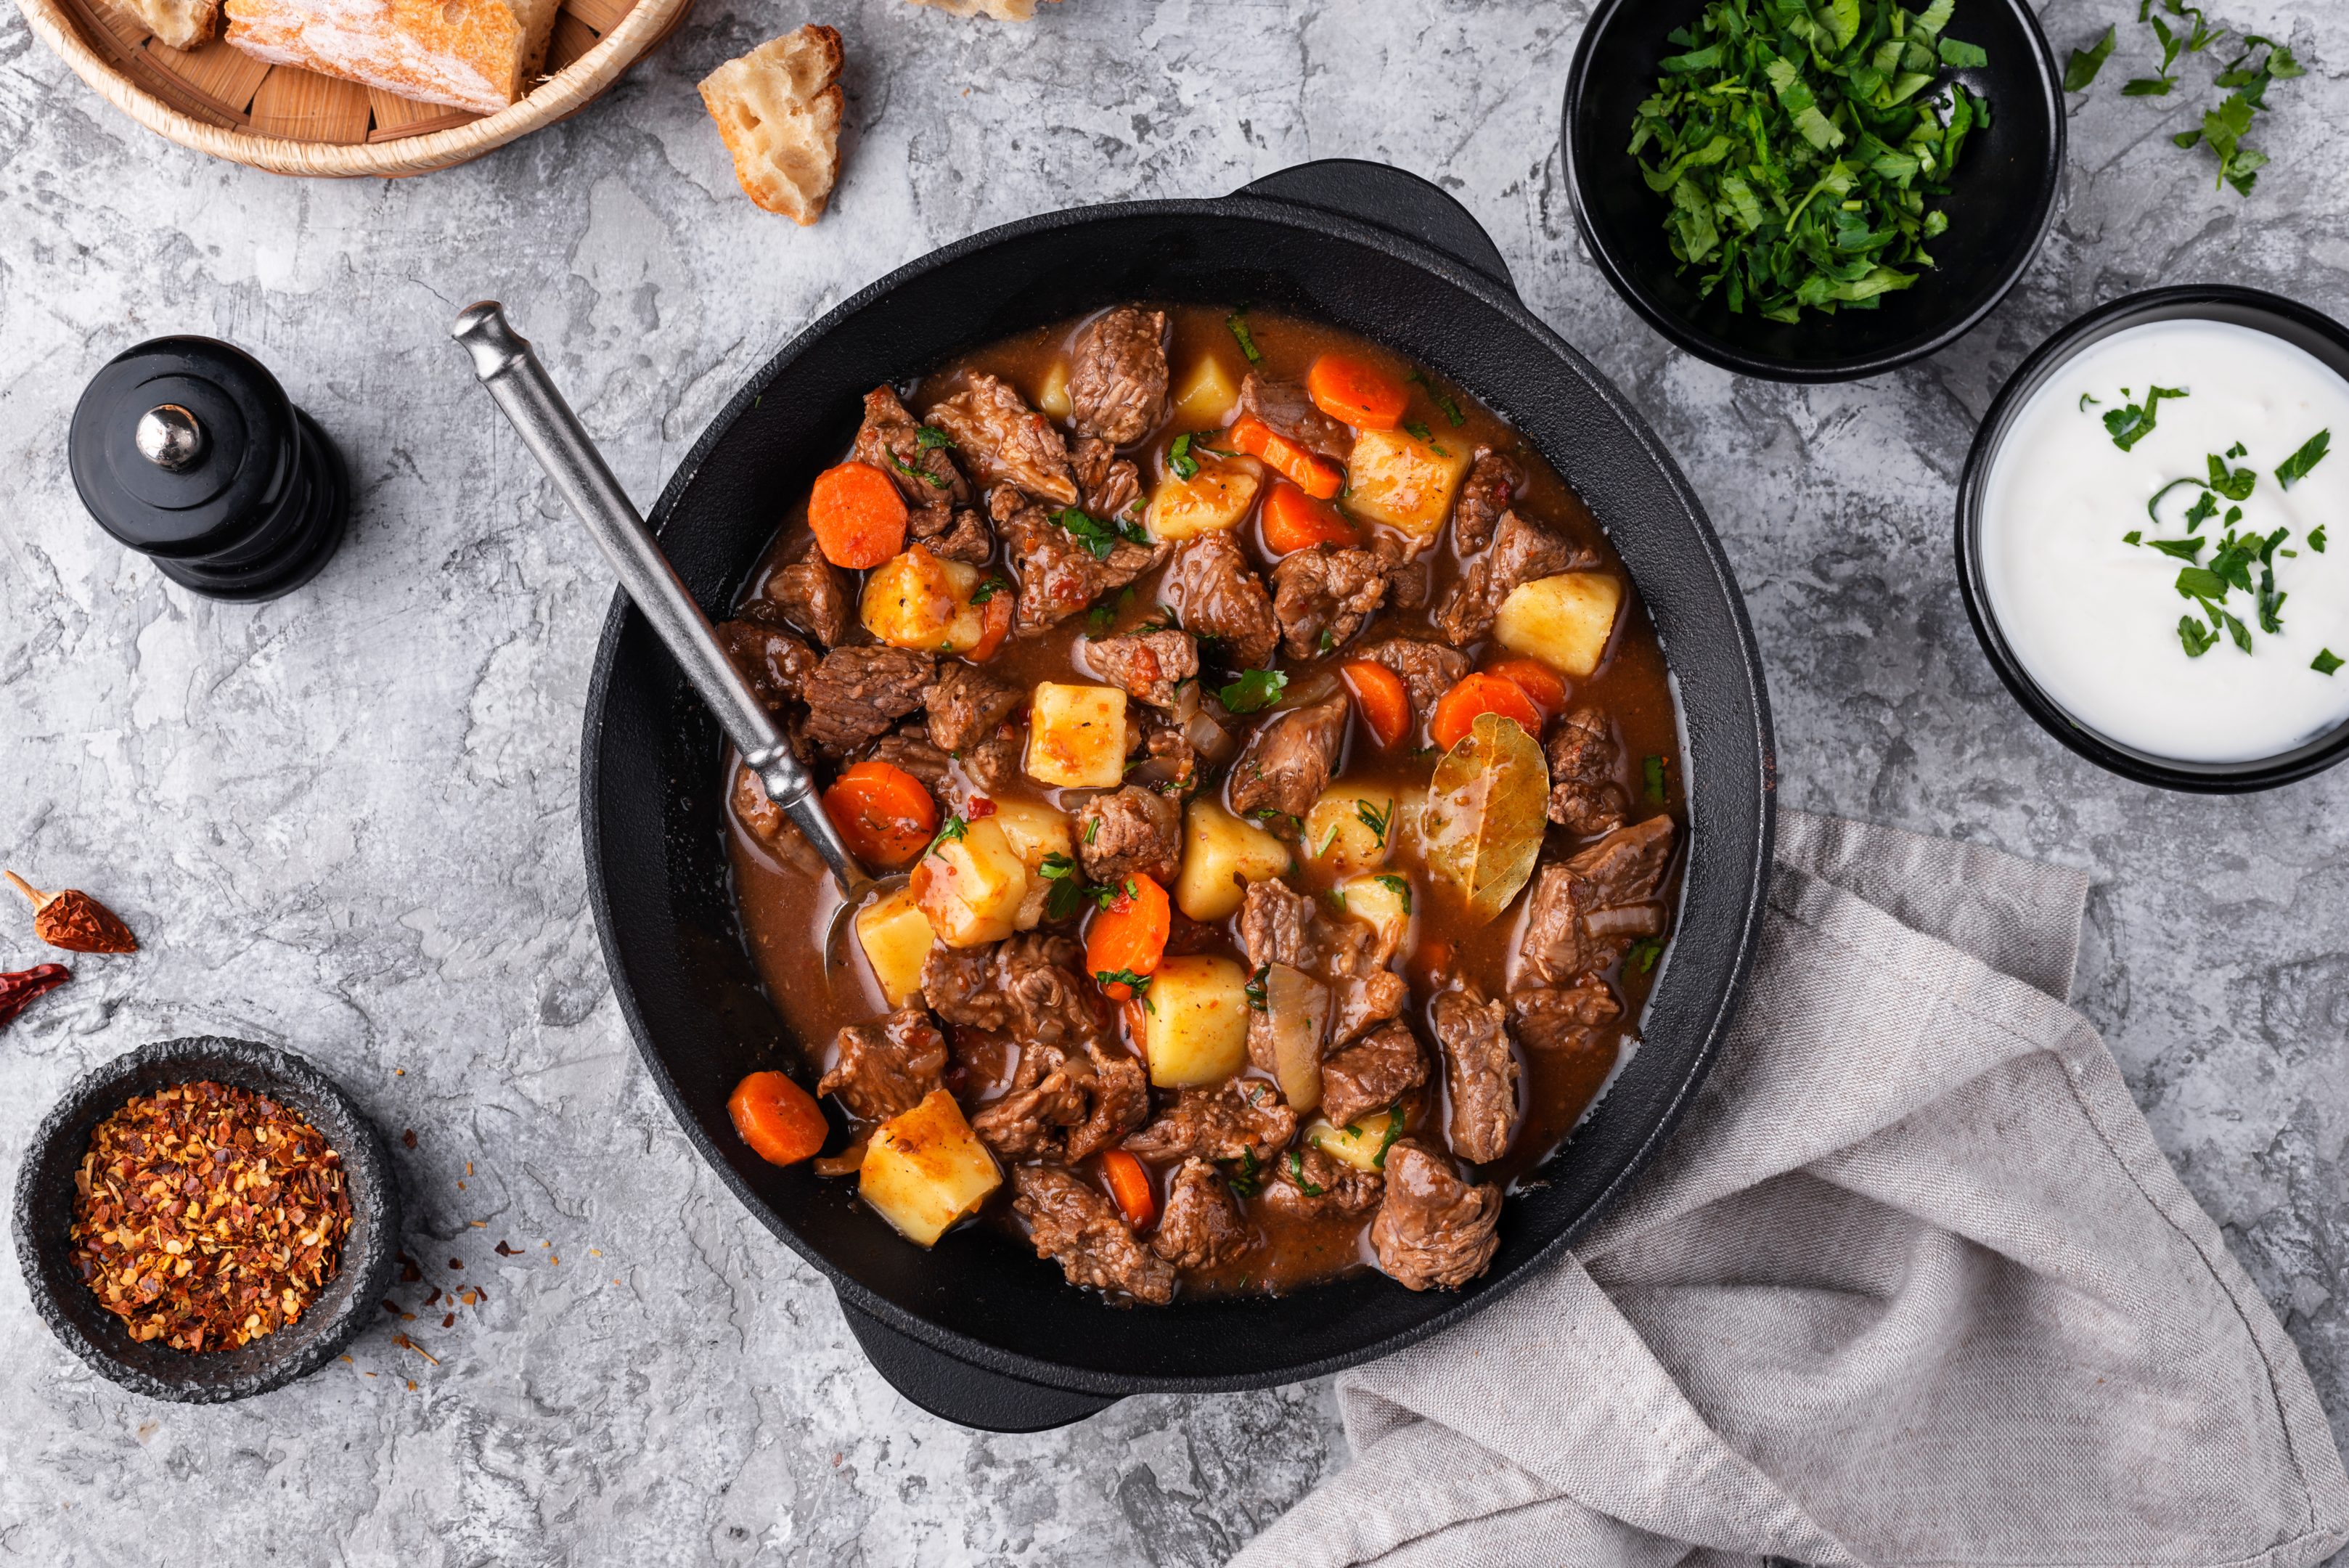 Find absolutely delicious beef stew recipes and receive 5 stars at every meal!